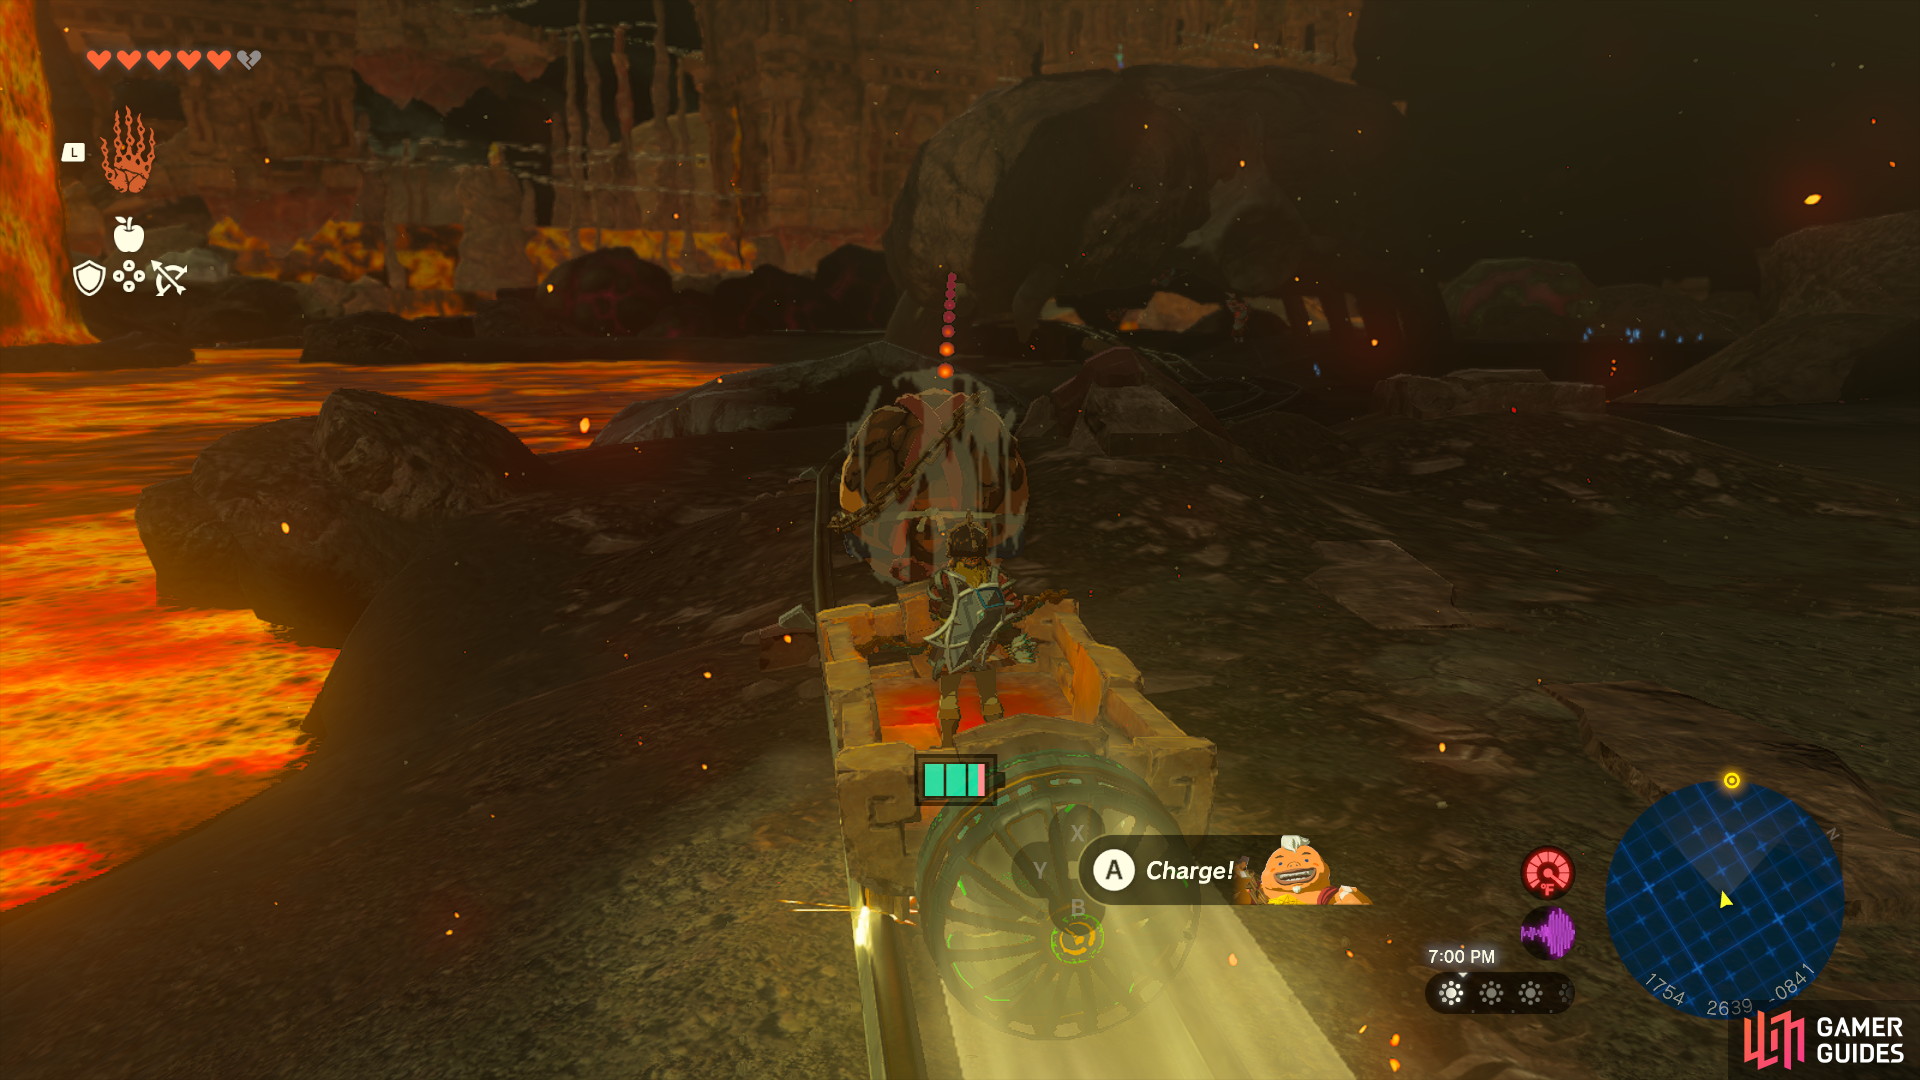 Ride the cart to the Fire Temple while using Yunobo to attack enemies.